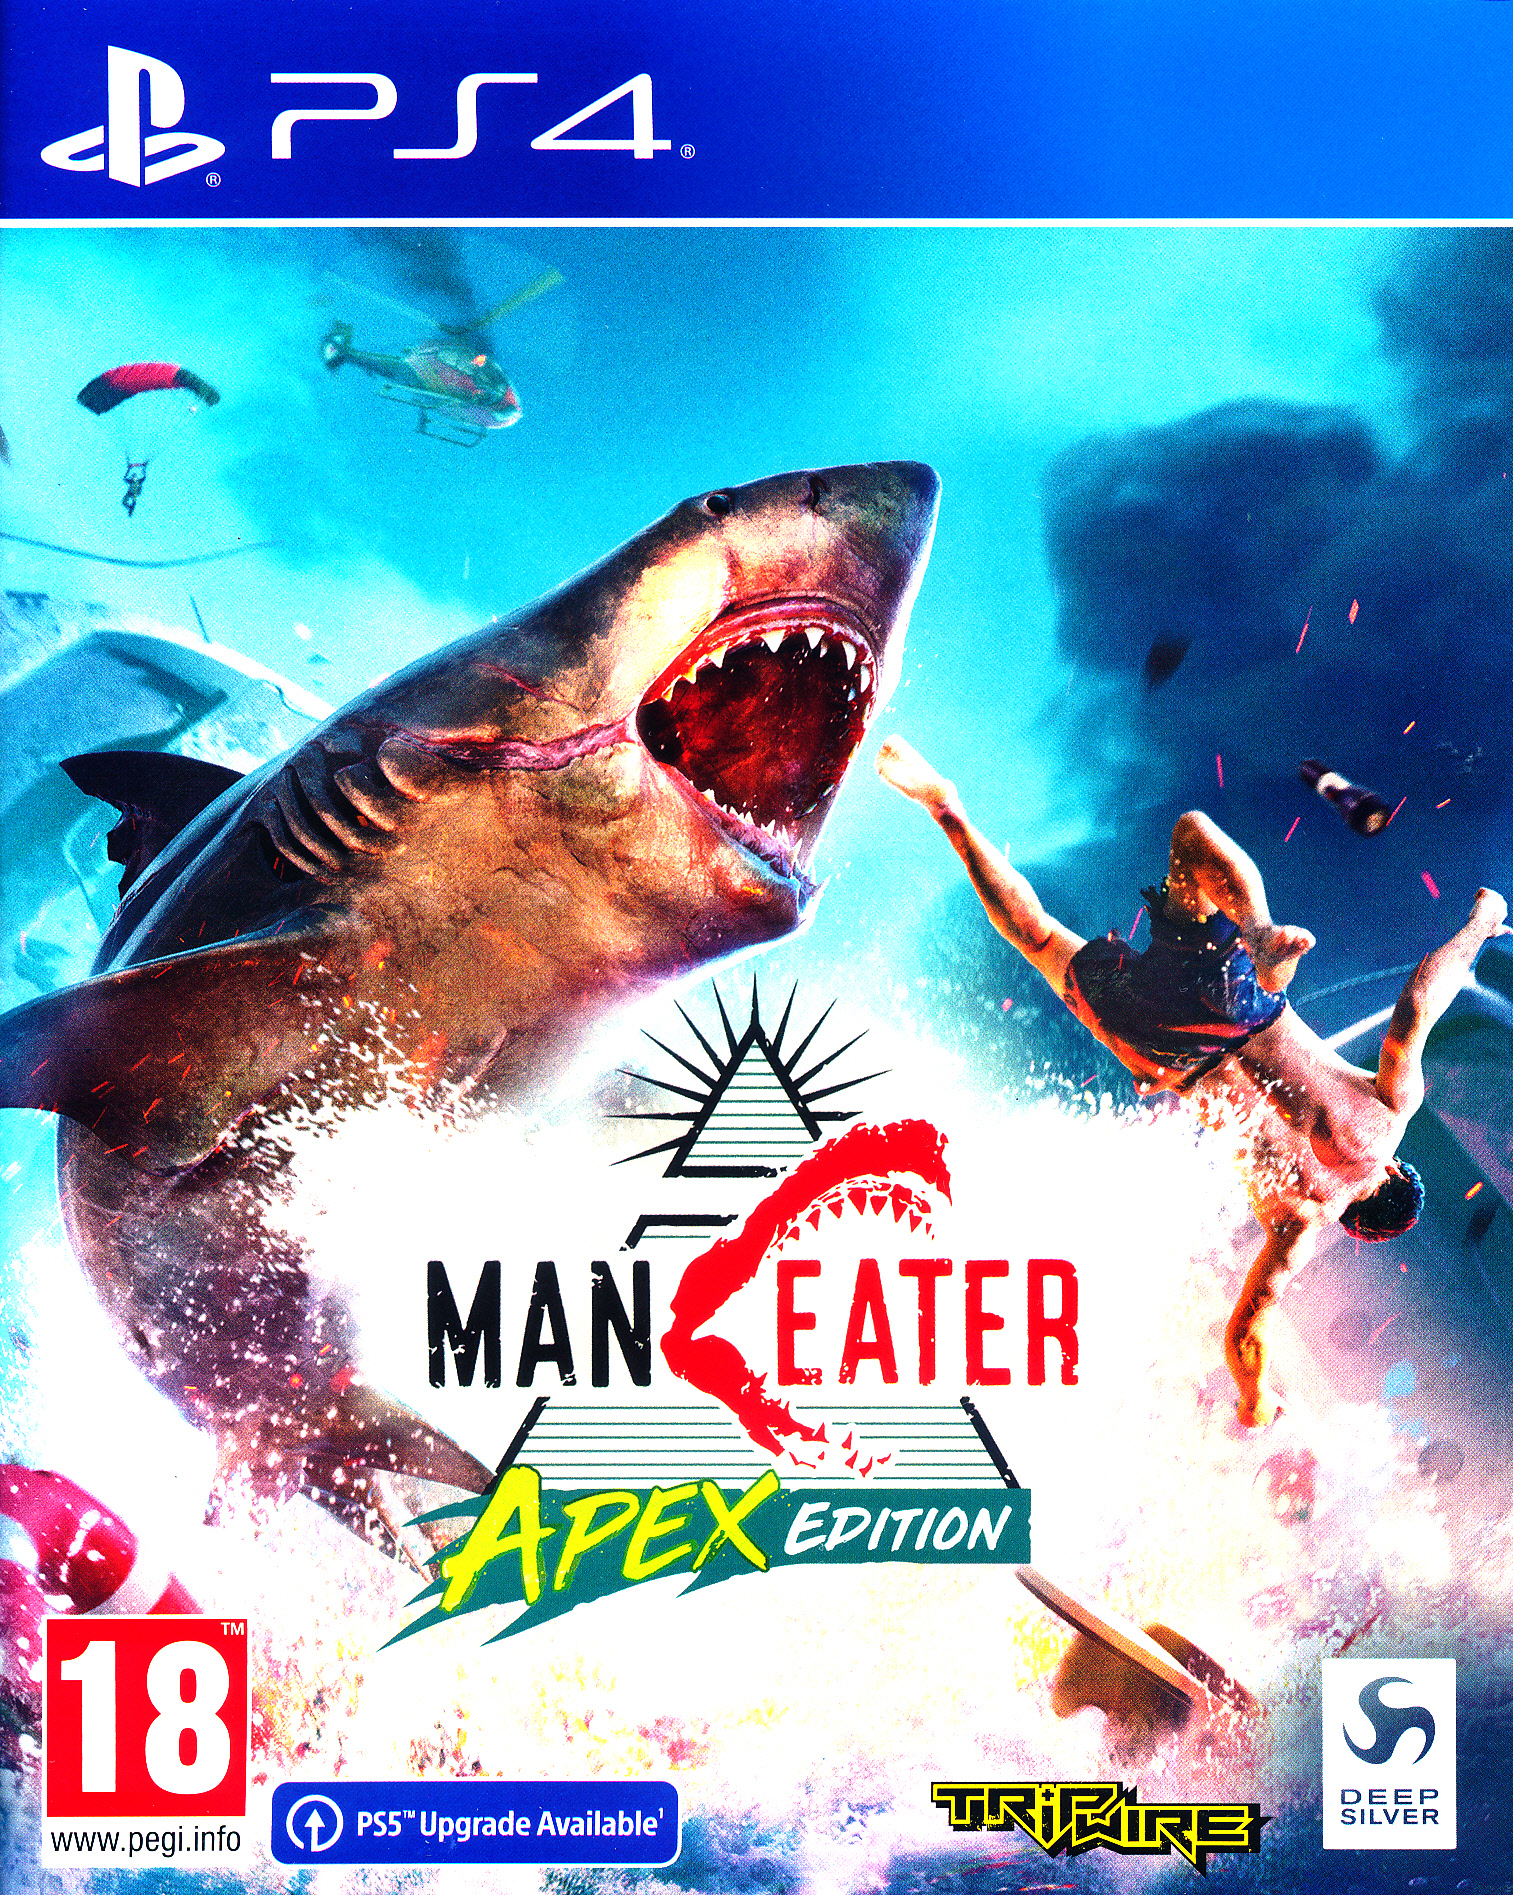 Maneater APEX Edition PS4